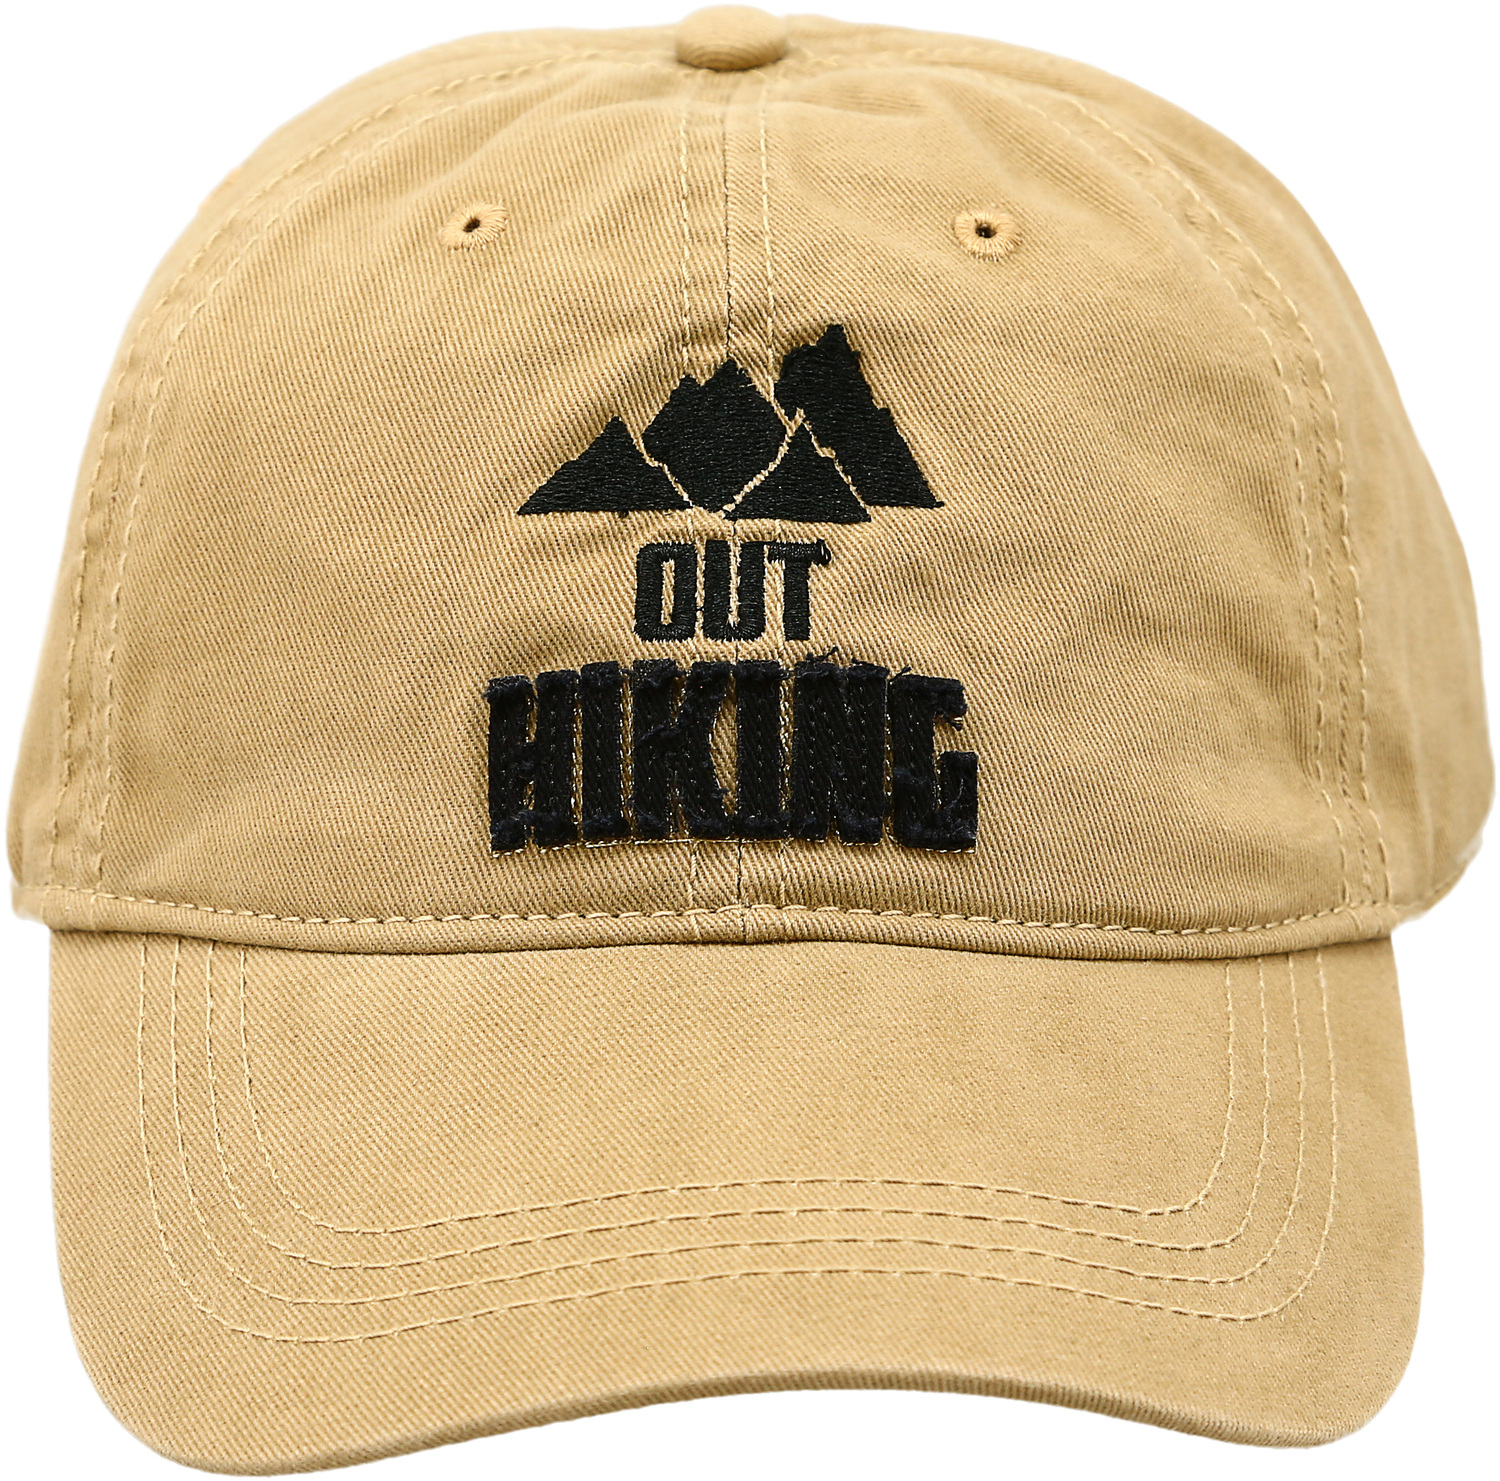 Out Hiking by Man Out - Out Hiking - Tan Adjustable Hat